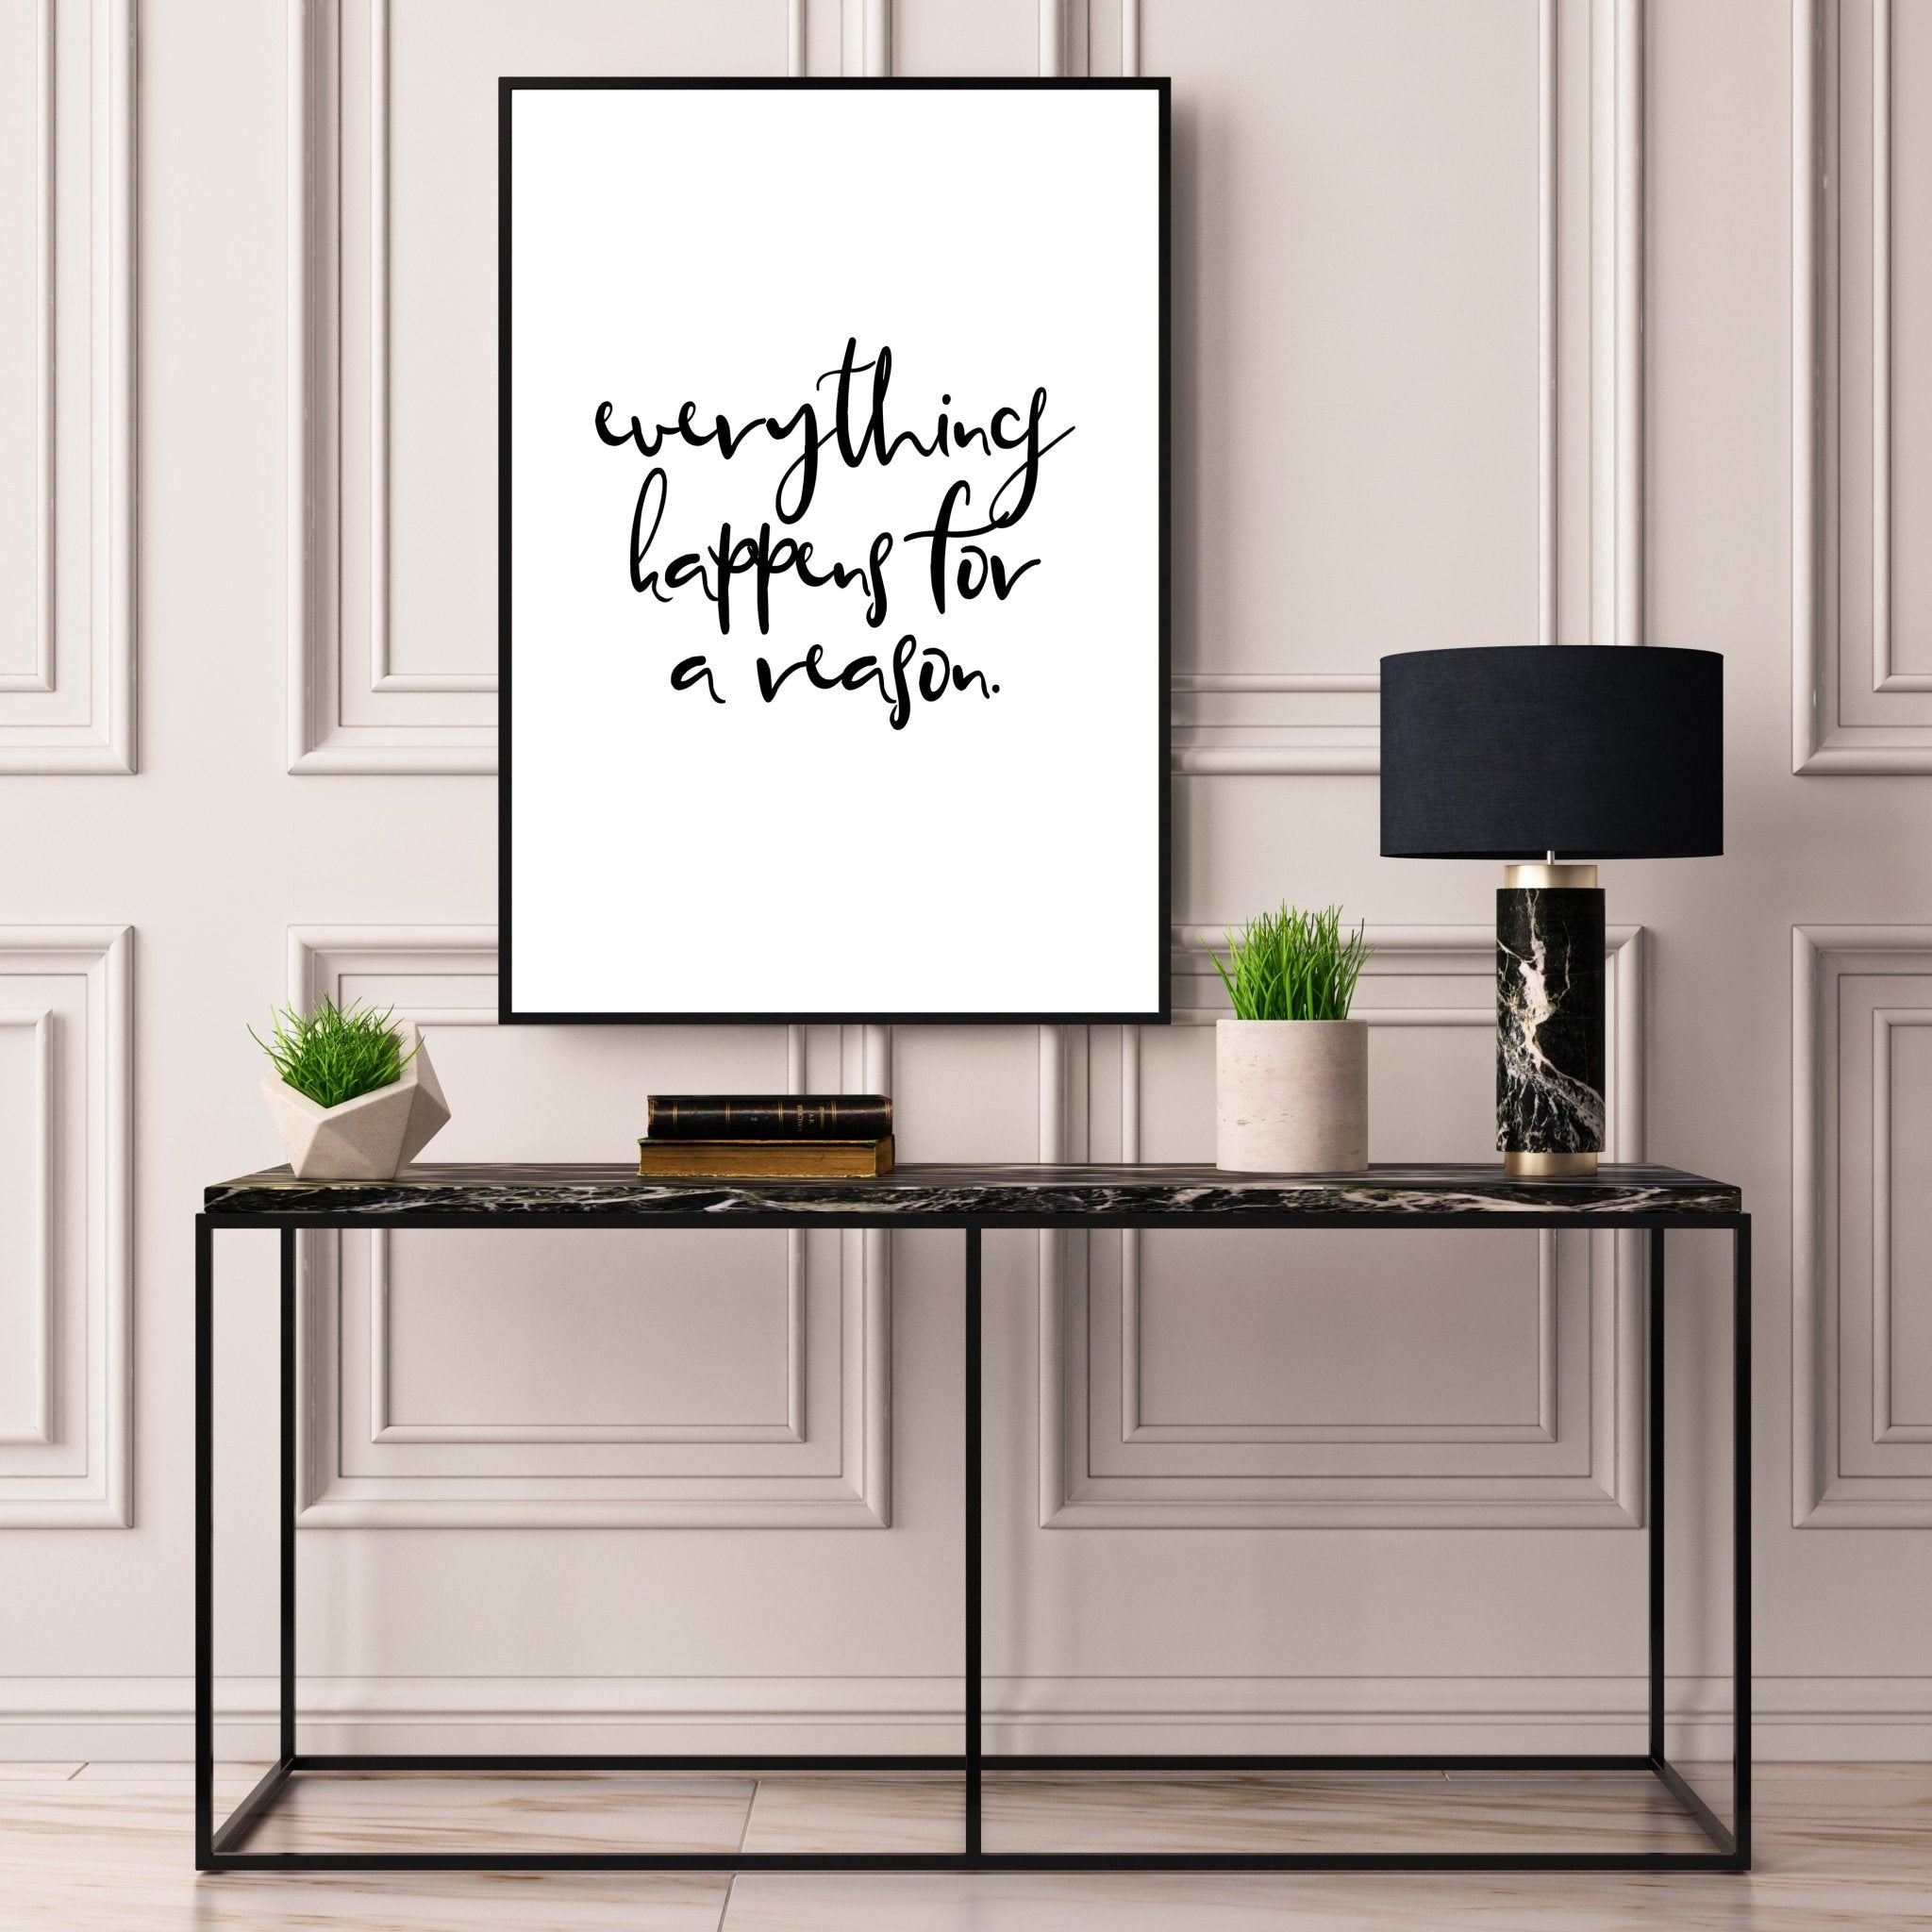 Everything Happens For A Reason - D'Luxe Prints